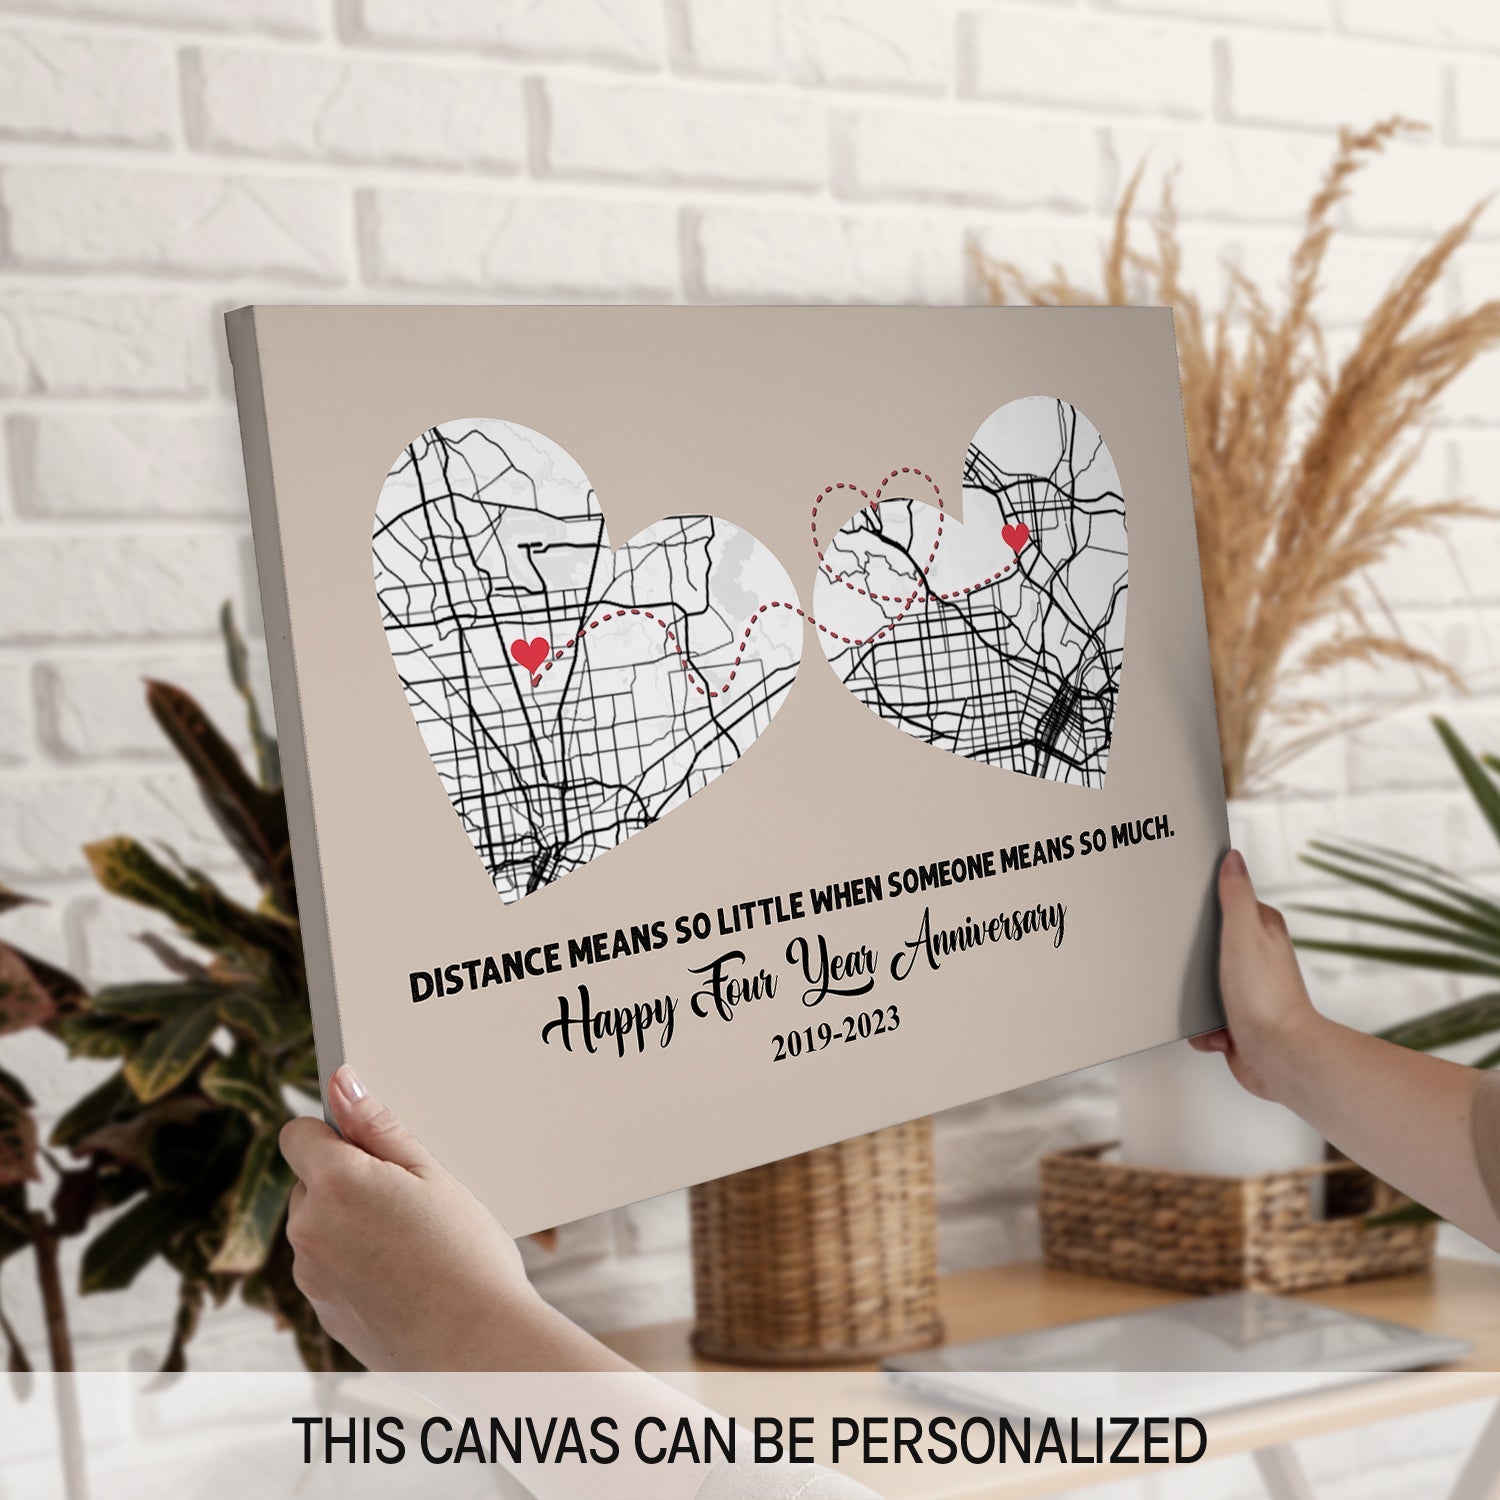 Four Year Anniversary Distance Means So Little Map - Personalized 4 Year Anniversary gift for Long Distance Boyfriend or Girlfriend - Custom Canvas Print - MyMindfulGifts